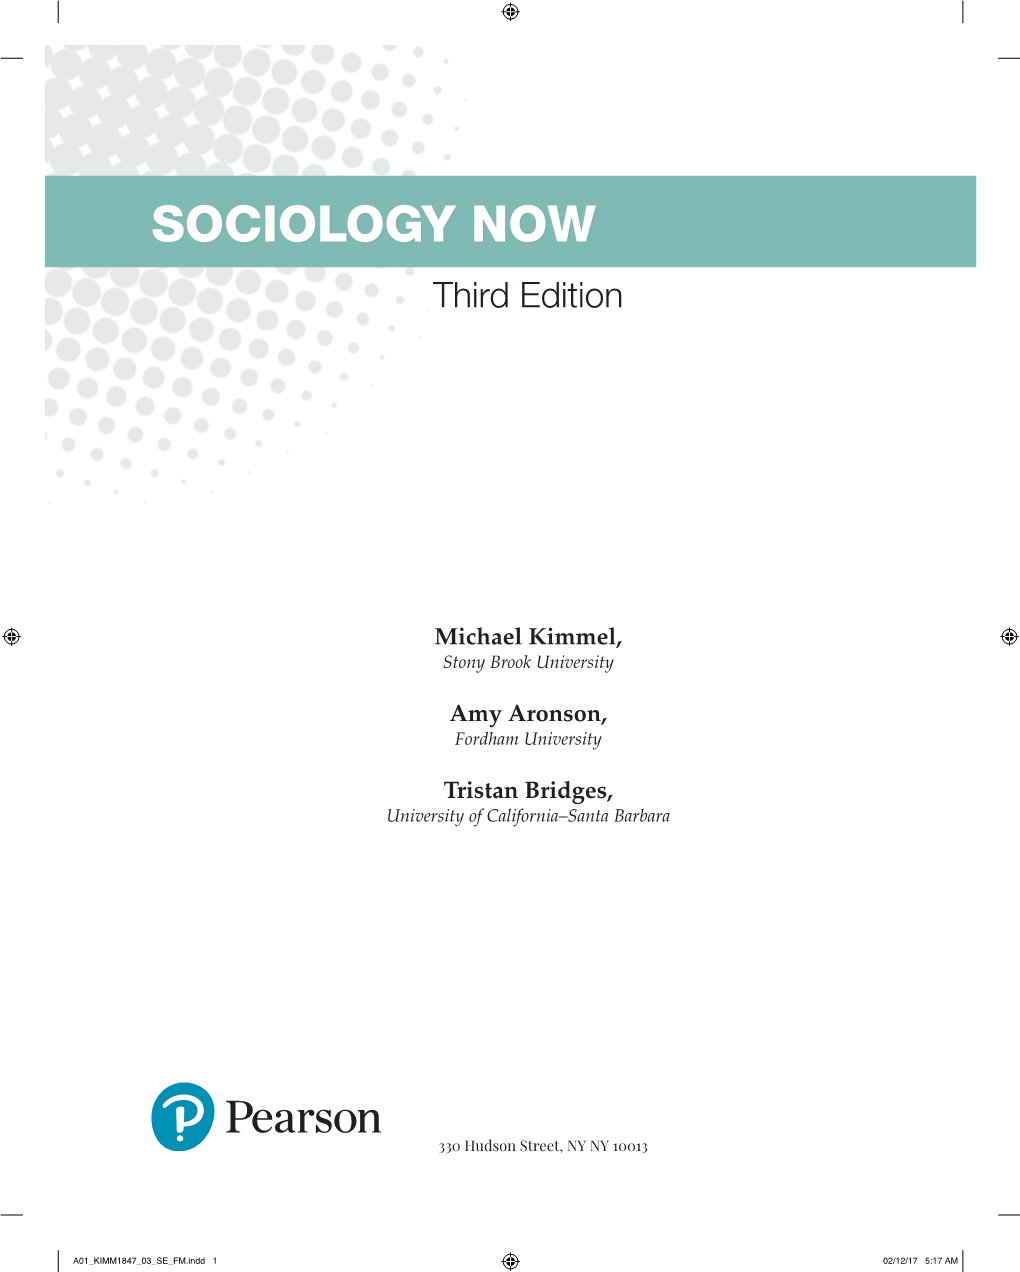 SOCIOLOGY NOW Third Edition